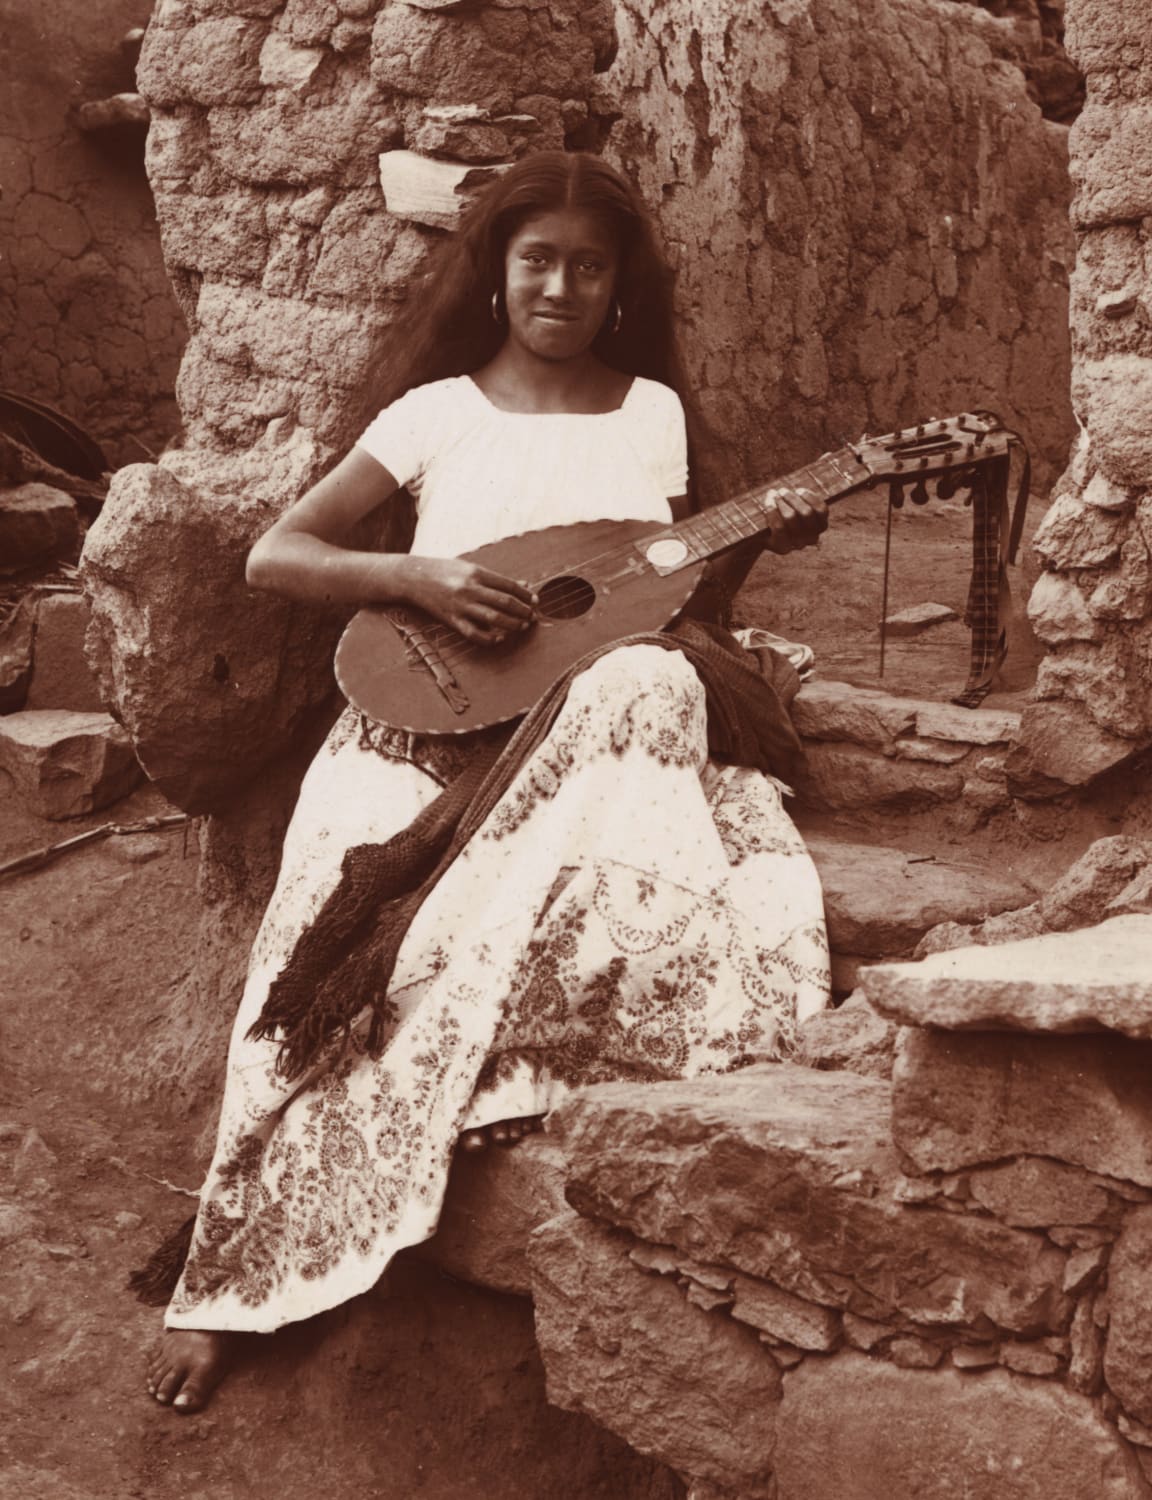 Young Woman from Guanajuato, Mexico playing a mandolina conchera, a guitar-like instrument traditionally made from the shell of an armadillo circa 1895